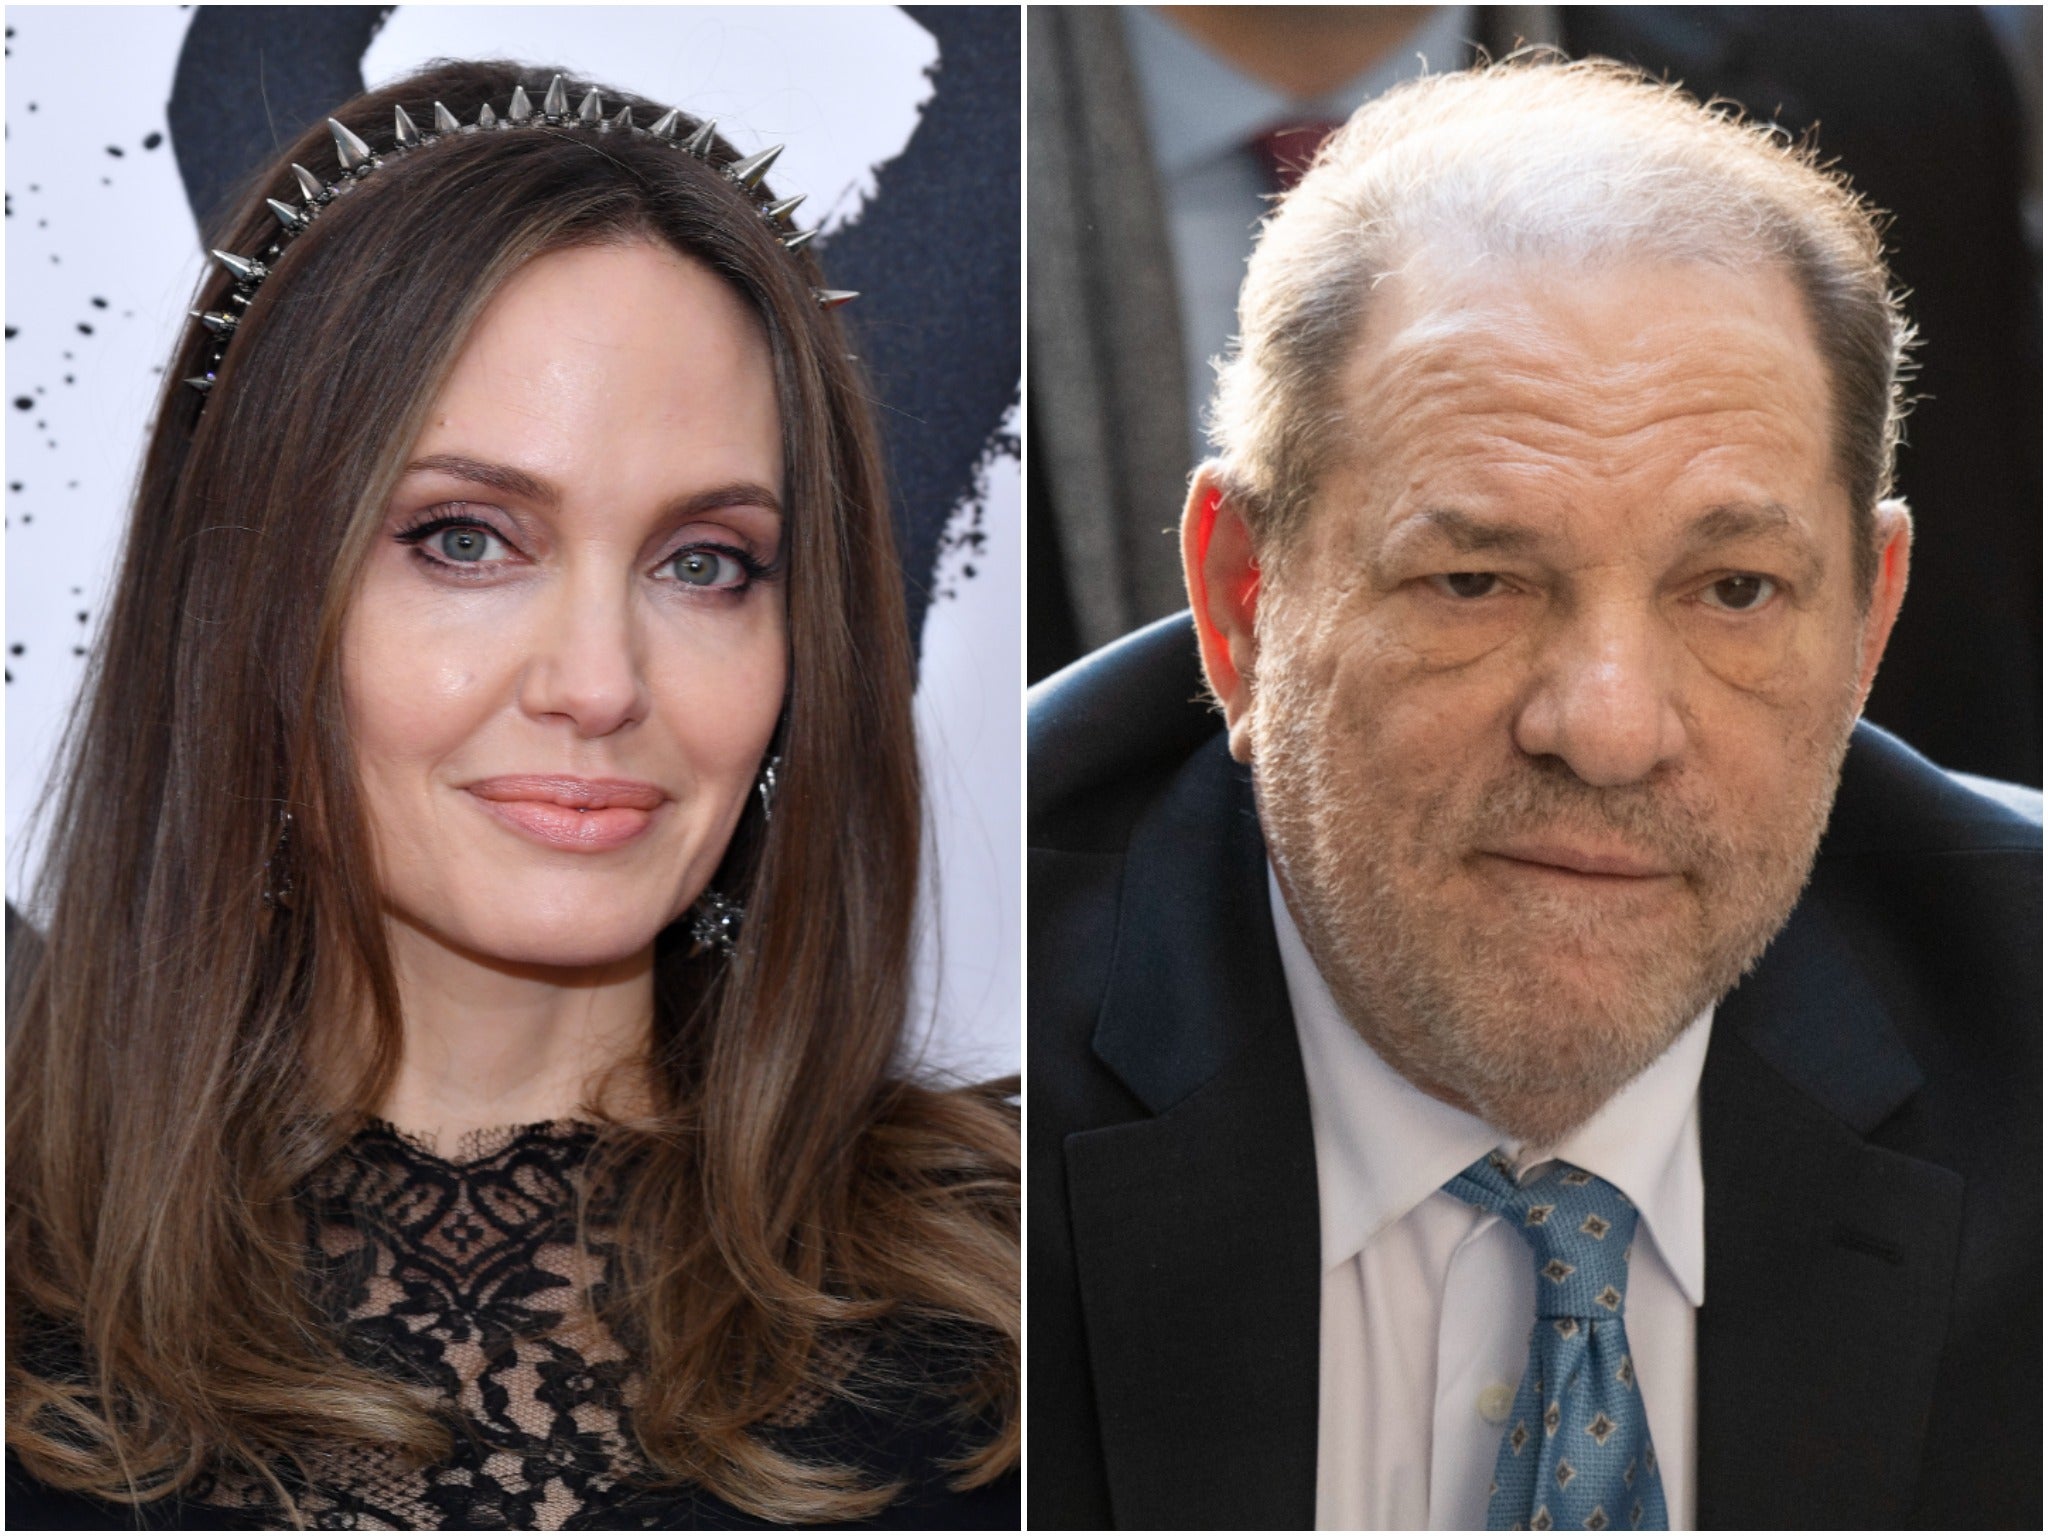 Jolie made the claims about Weinstein in a new interview